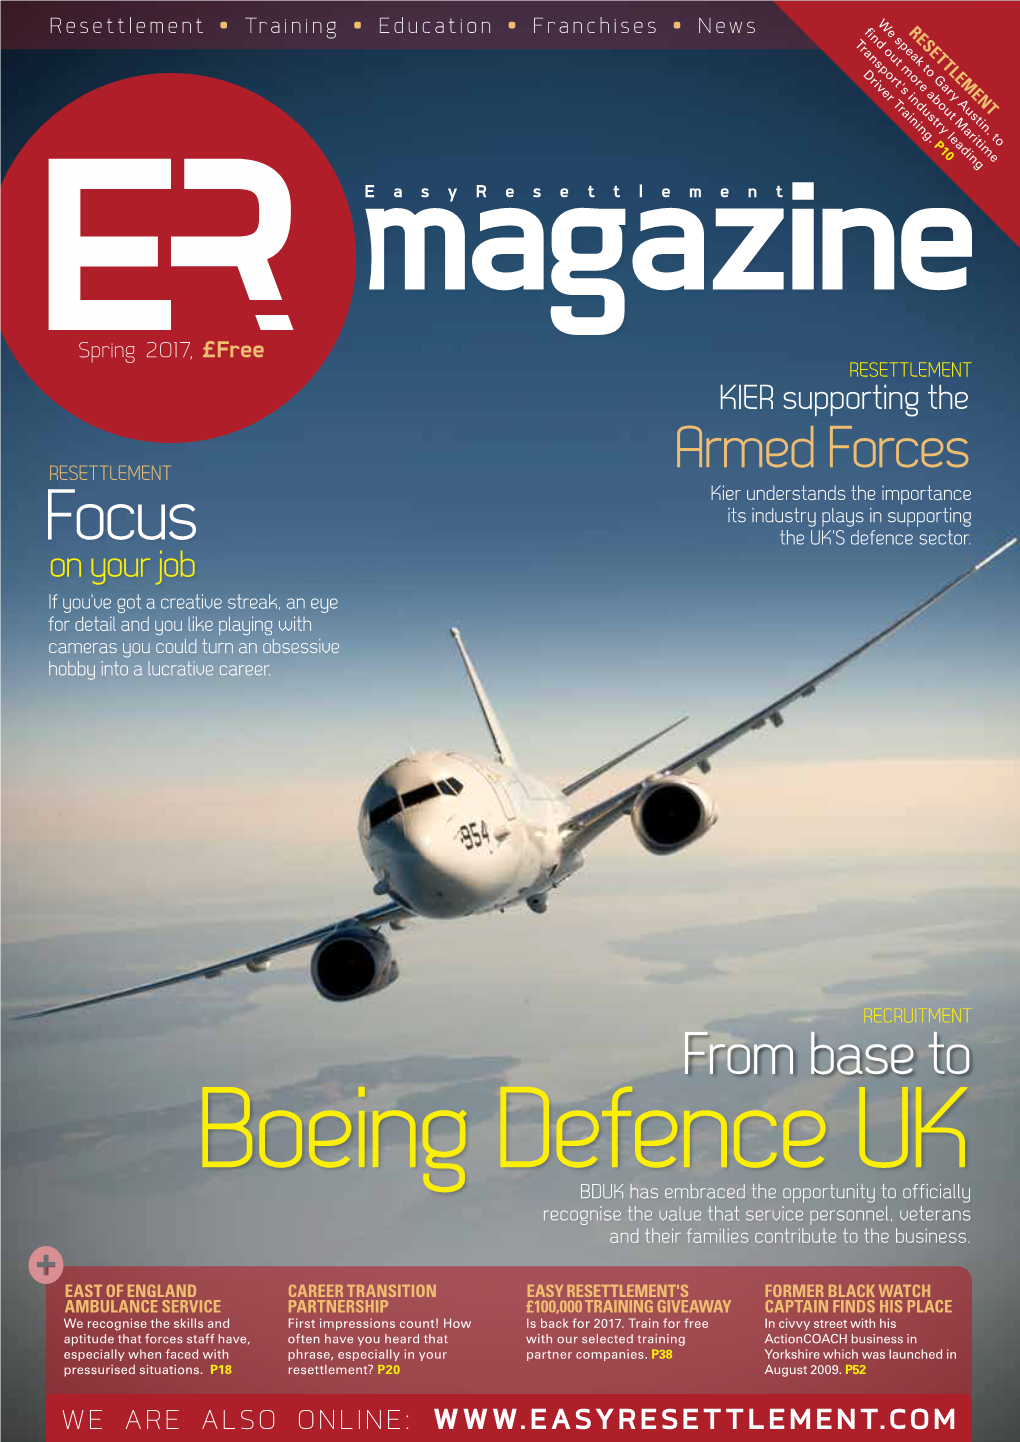 Boeing Defence UK BDUK Has Embraced the Opportunity to Officially Recognise the Value That Service Personnel, Veterans and Their Families Contribute to the Business